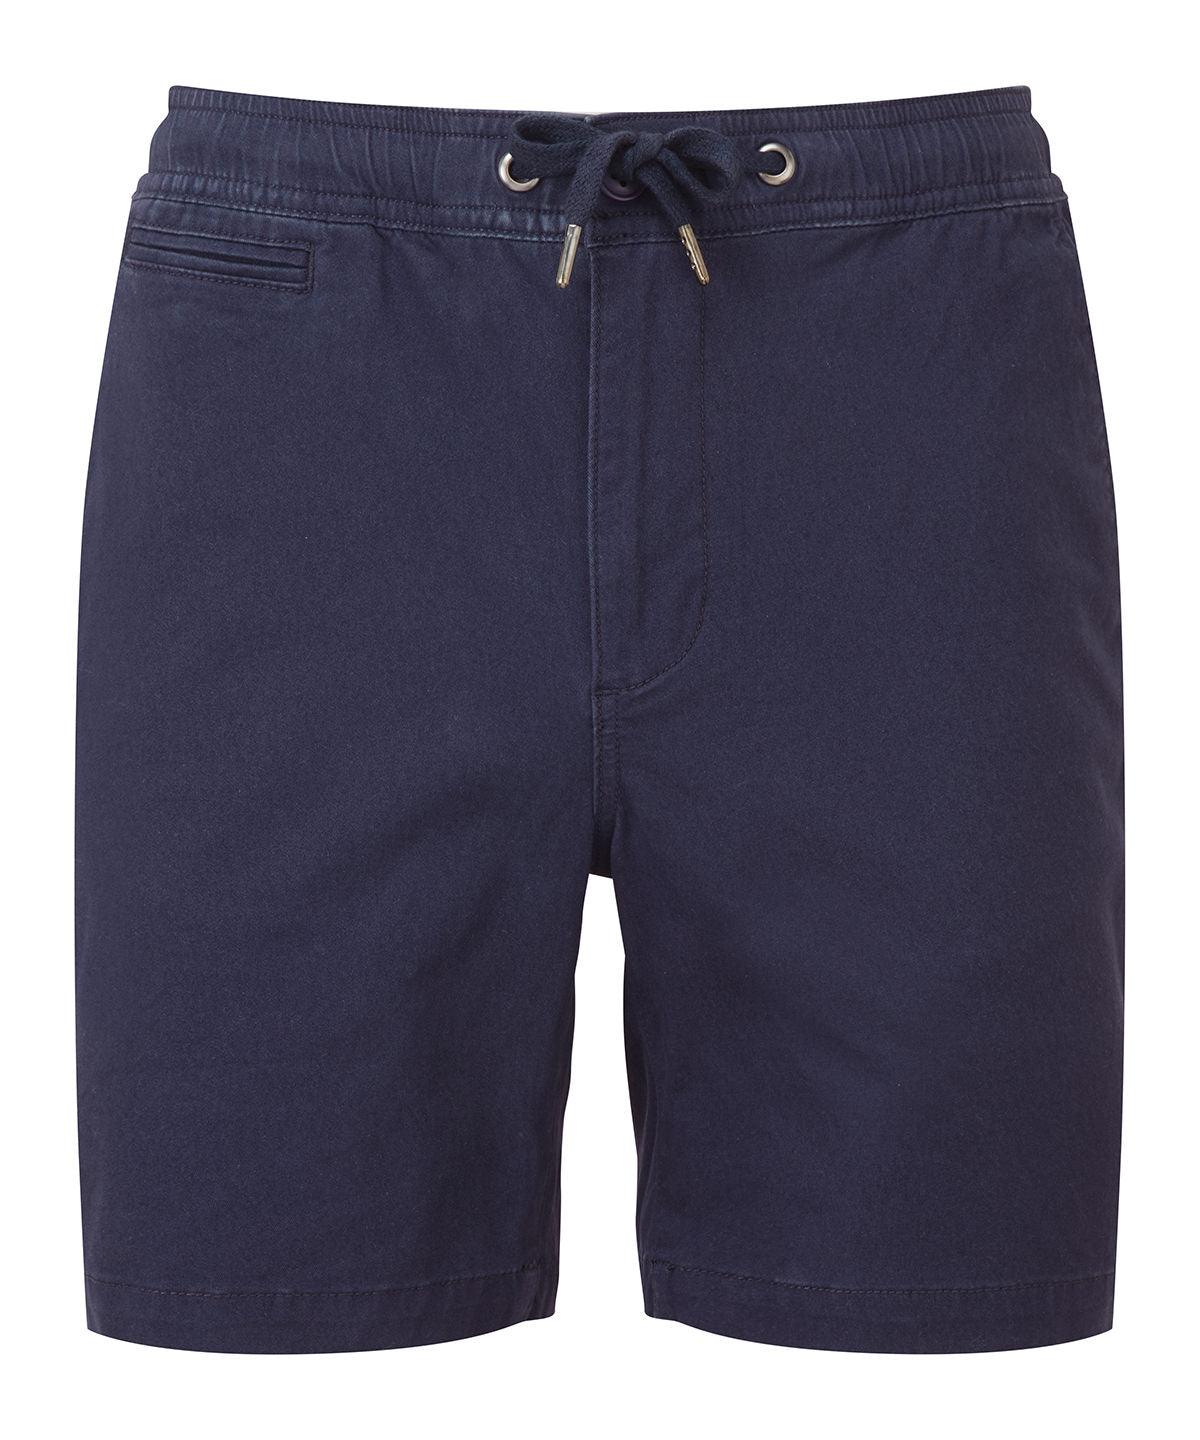 Navy - Men’s drawstring chino shorts Shorts Wombat New Styles for 2023, Rebrandable, Trousers & Shorts Schoolwear Centres